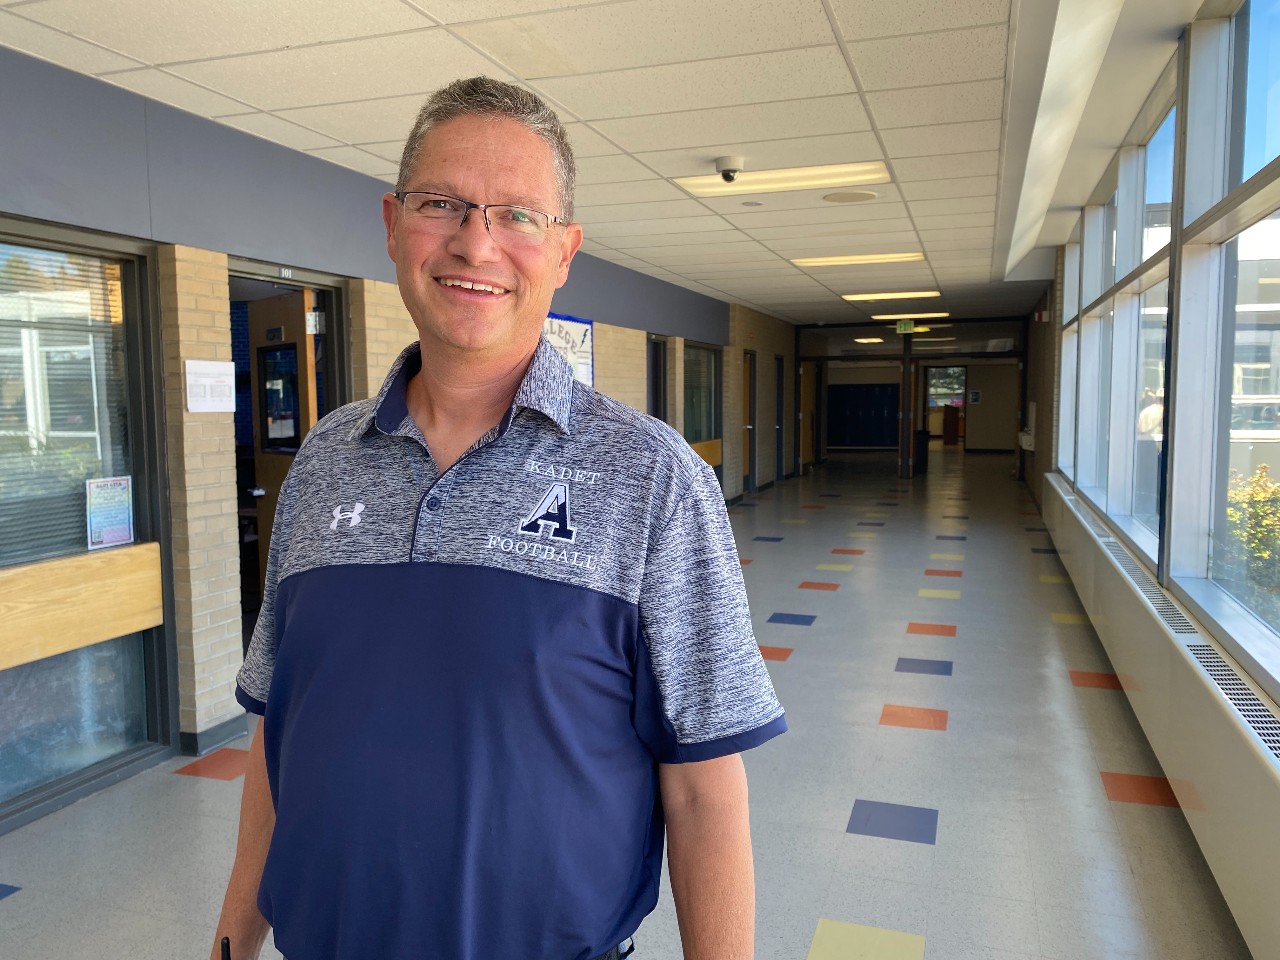 Tim Clark, building manager at Air Academy High School smiles for a picture in the school hallway